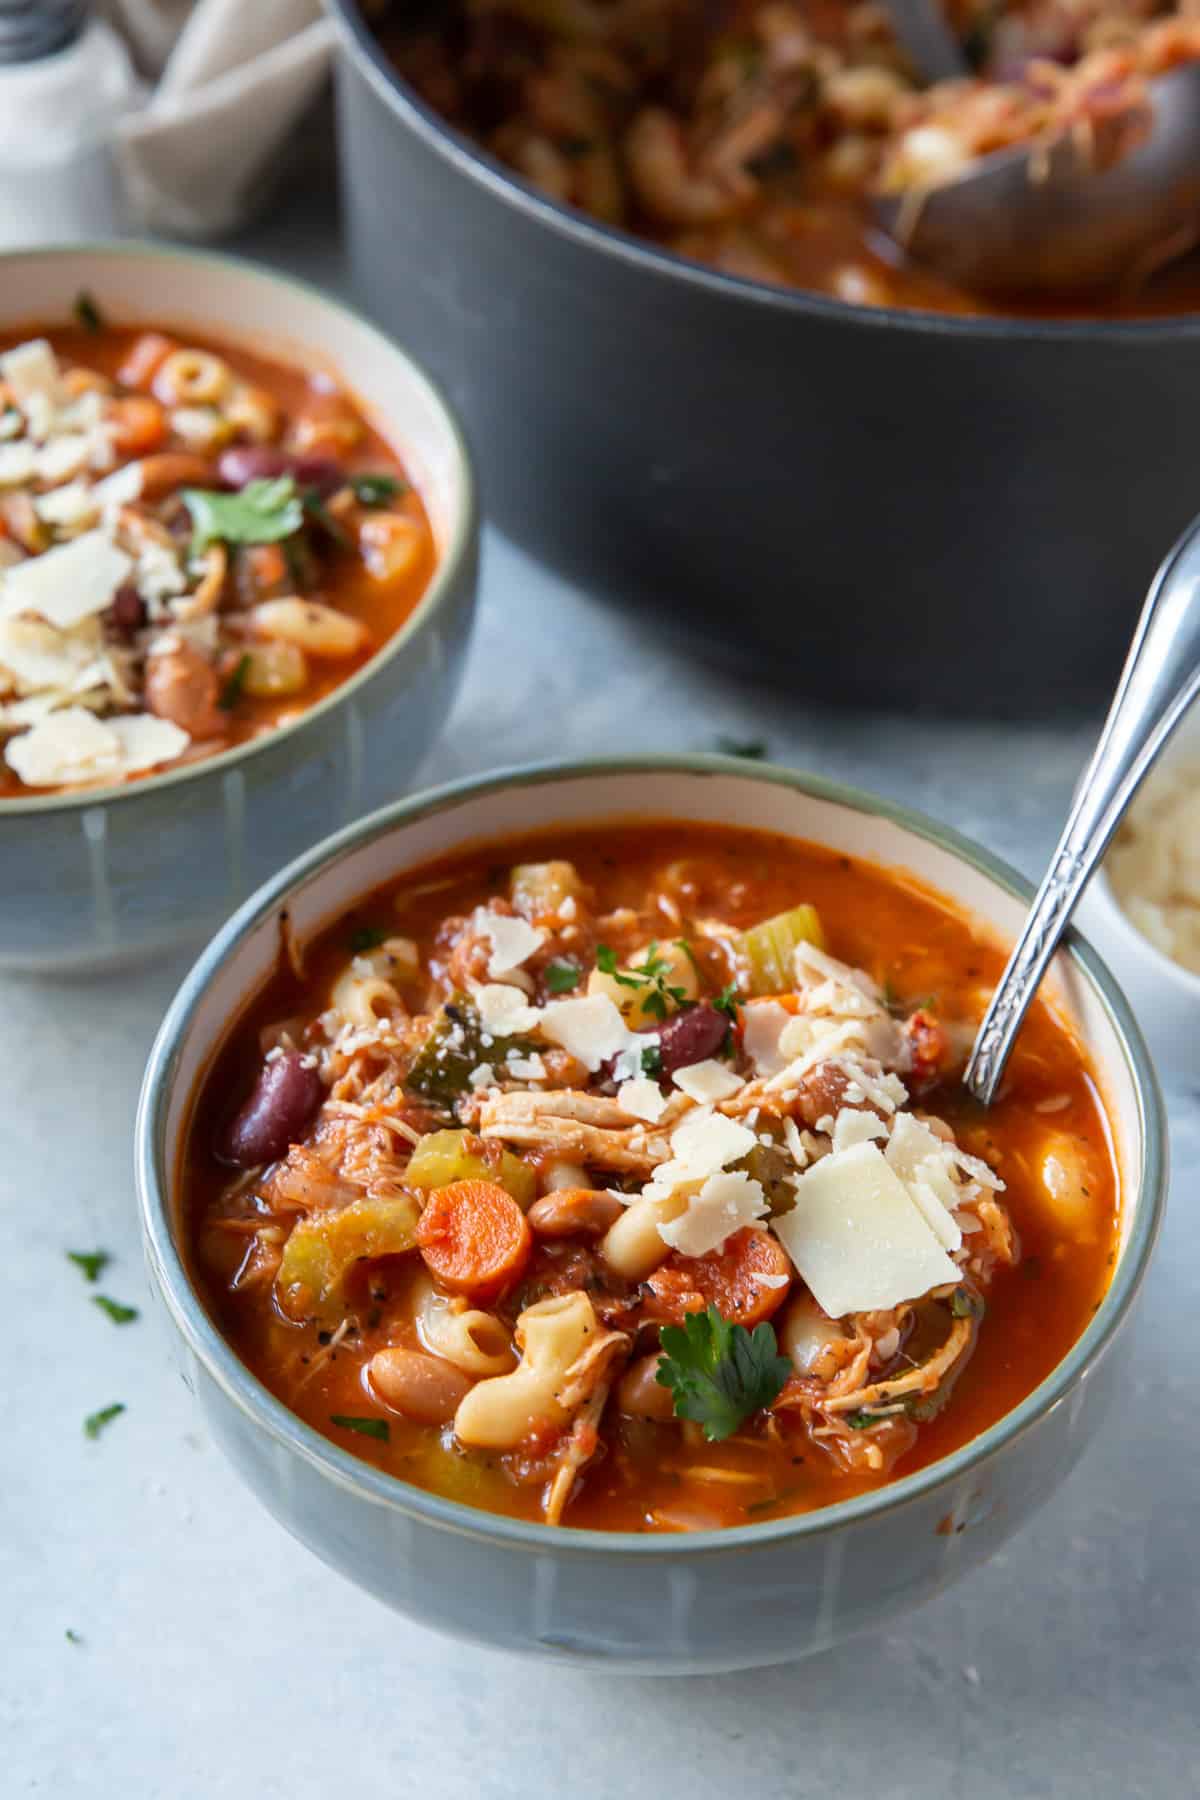 A spoon resting in a bowl of minestrone soup with shredded chicken and pasta.